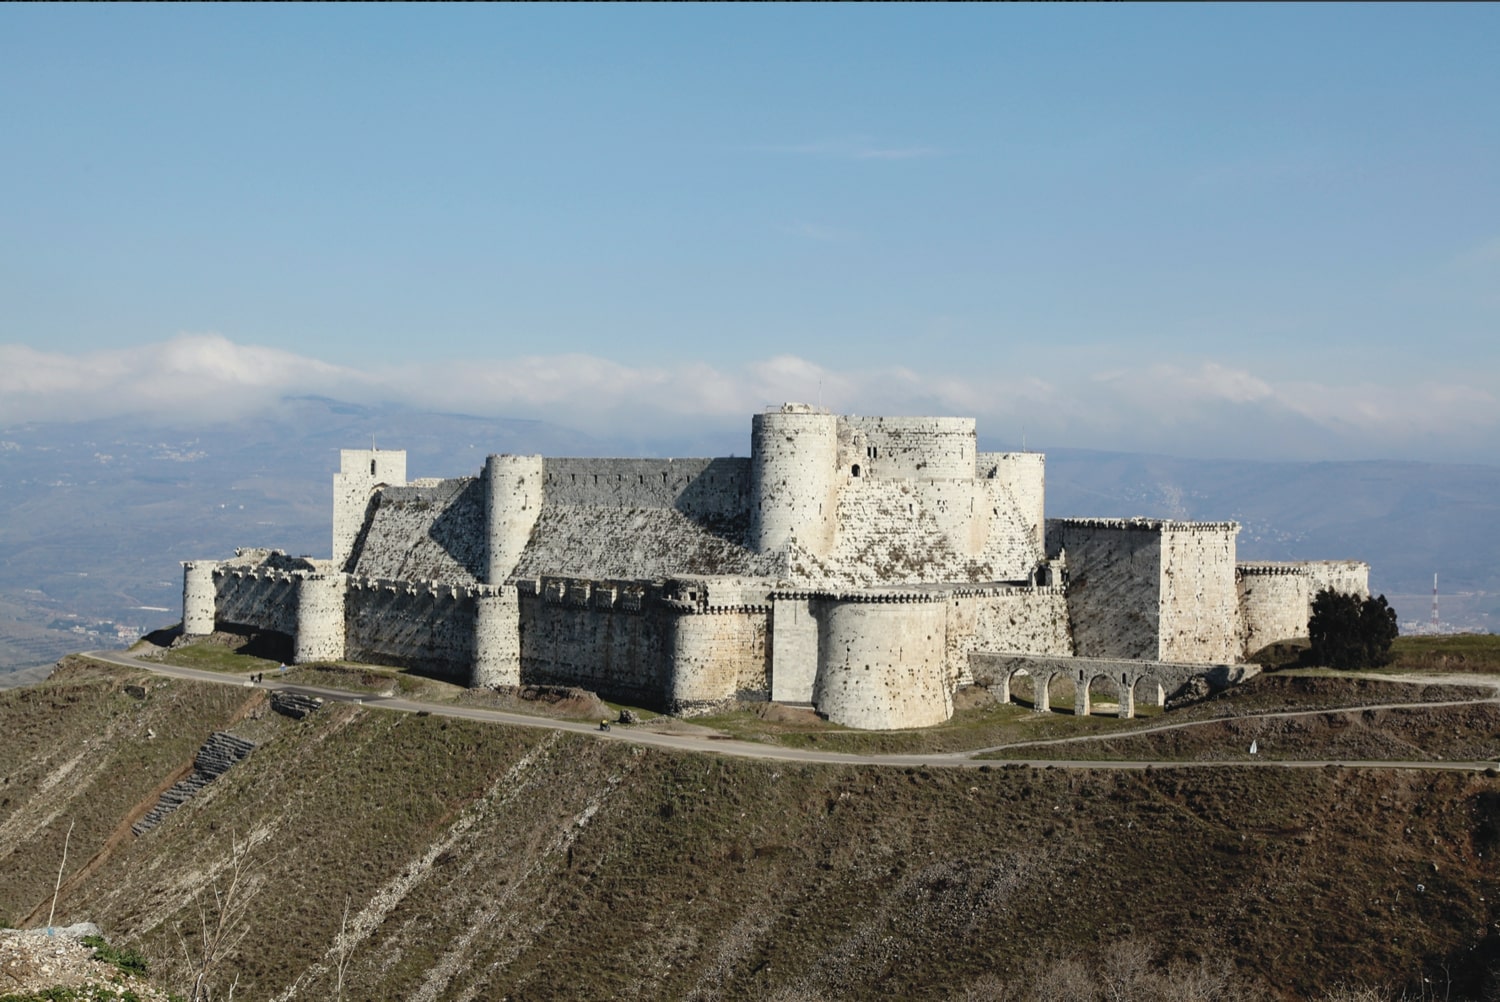 Krak des Chevaliers, a Crusader castle and UNESCO World Heritage Site, that has now been damaged during the war